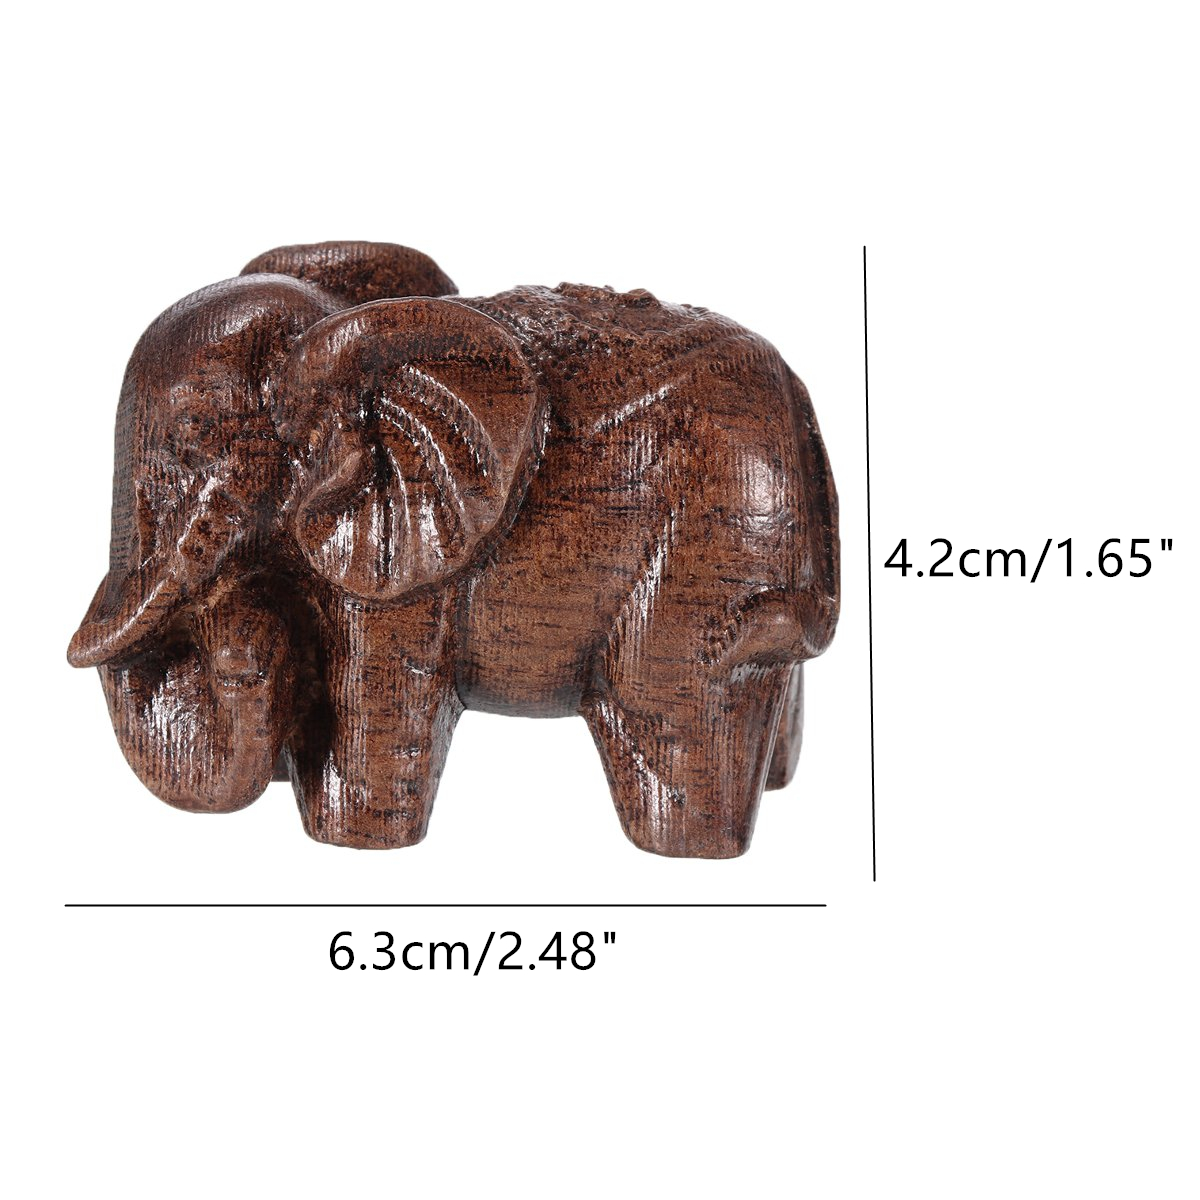 1-Pair-Natural-Agarwood-Elephant-Wood-Carving-Wood-Crafts-Retro-Decoration-Craft-Creative-Gifts-Home-1759099-12